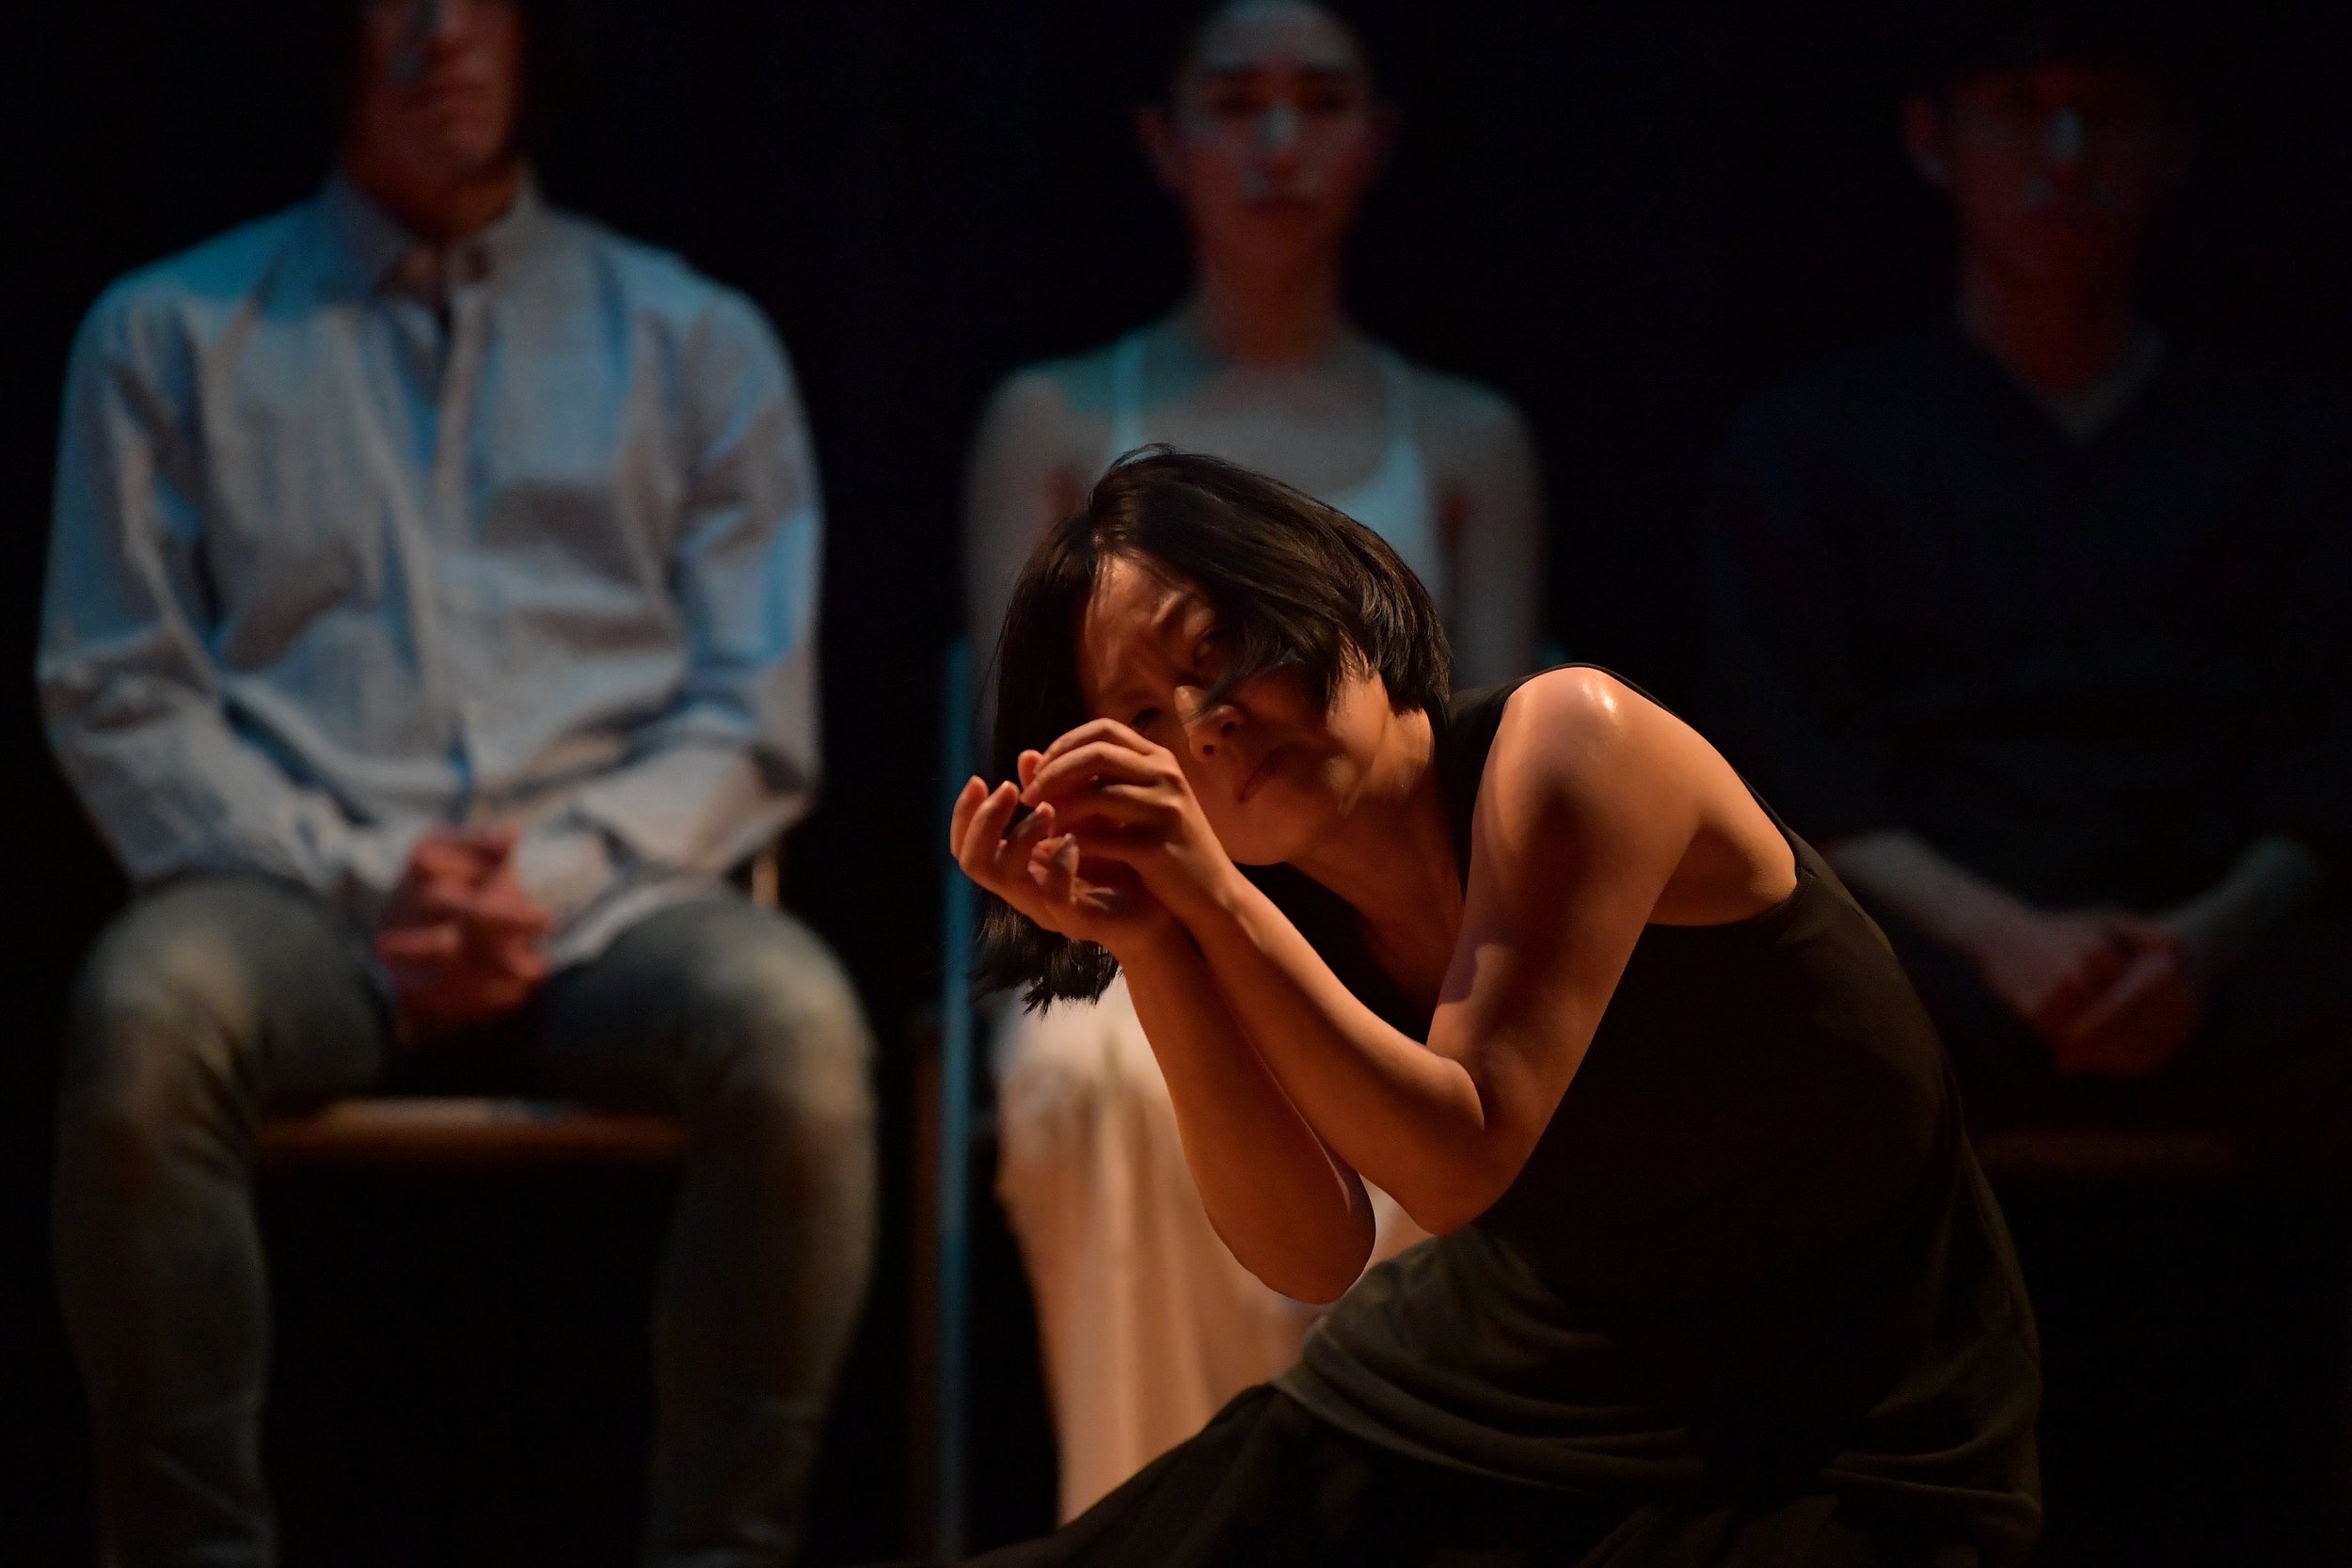 A dancer crouches, holding both hands in front of their face.